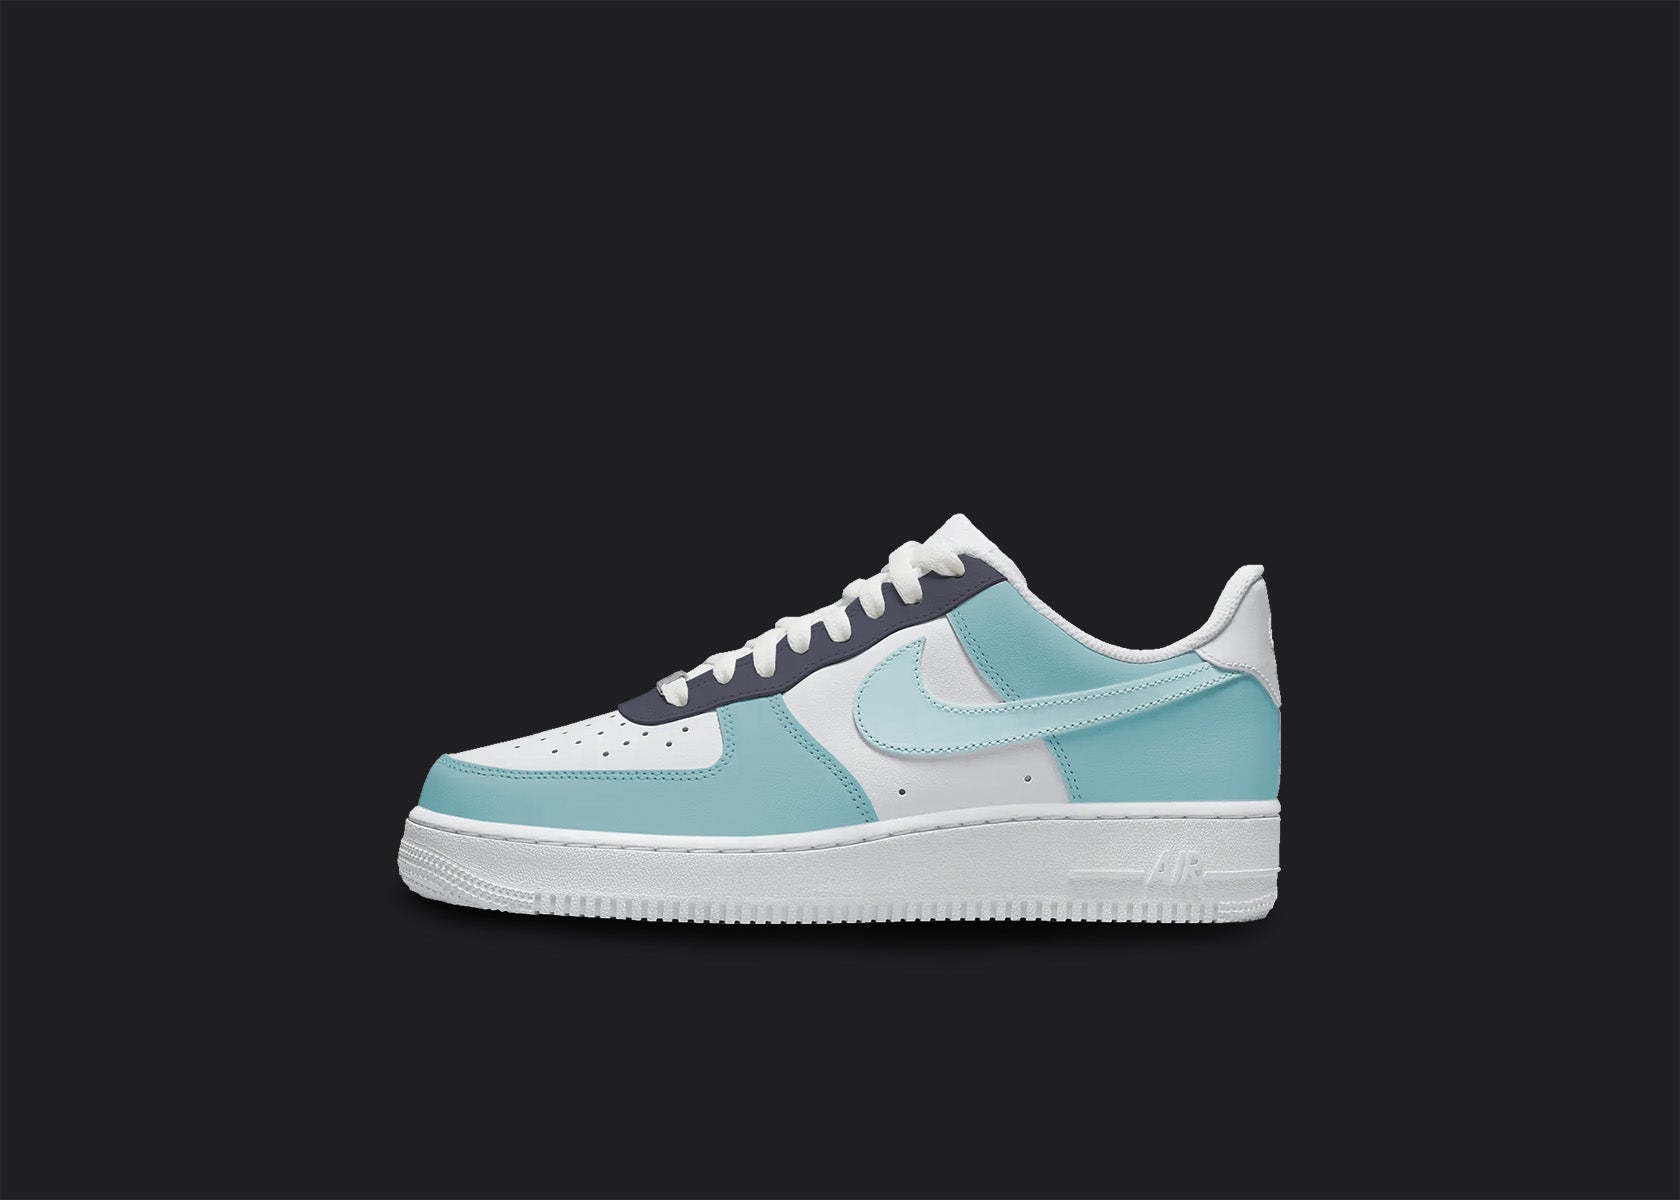 The image is of a Custom Nike Air force 1 sneaker on a blank black background. The custom sneaker are painted in lighter blue and gray colors. 